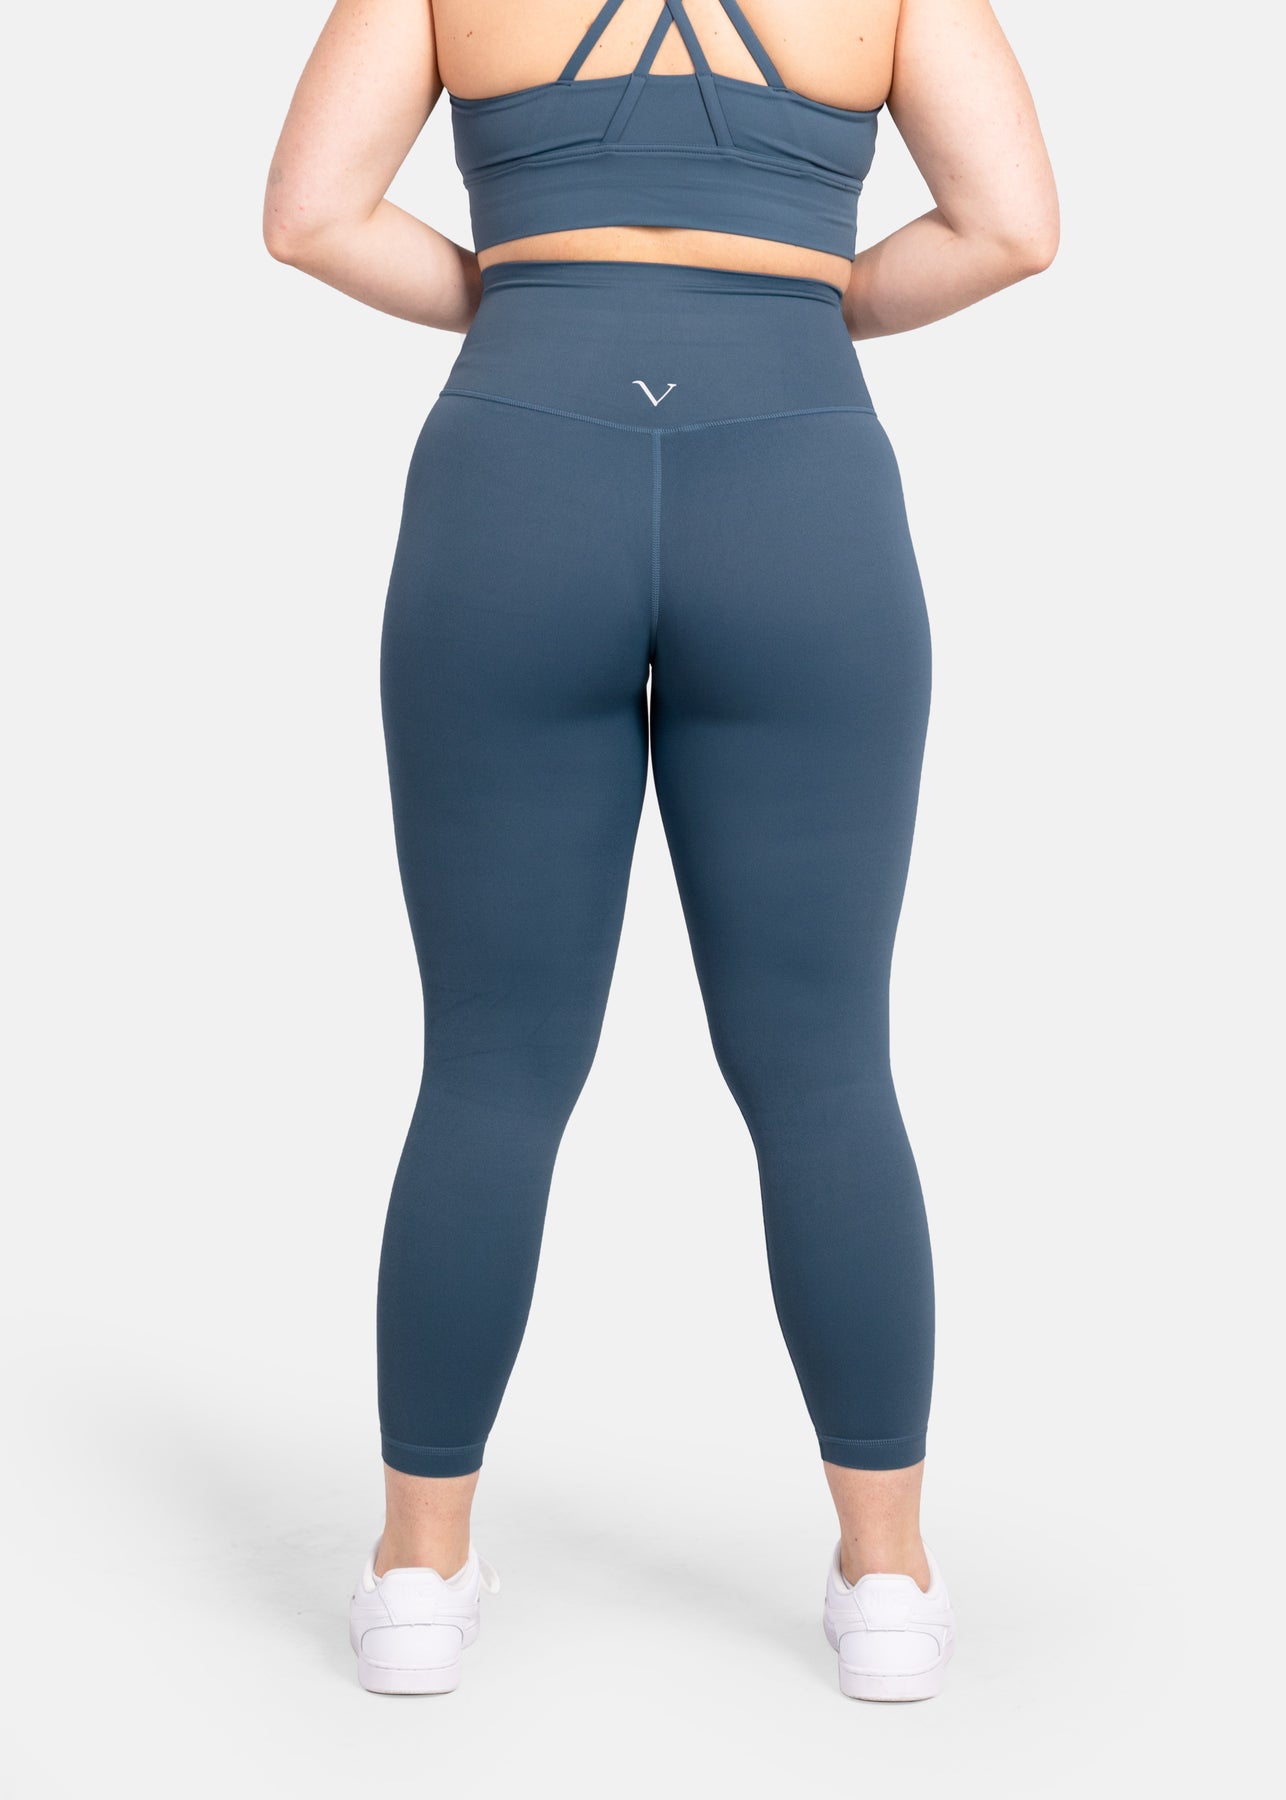 Peacock Blue Luxuriously Soft Leggings for Women (Size-One Size